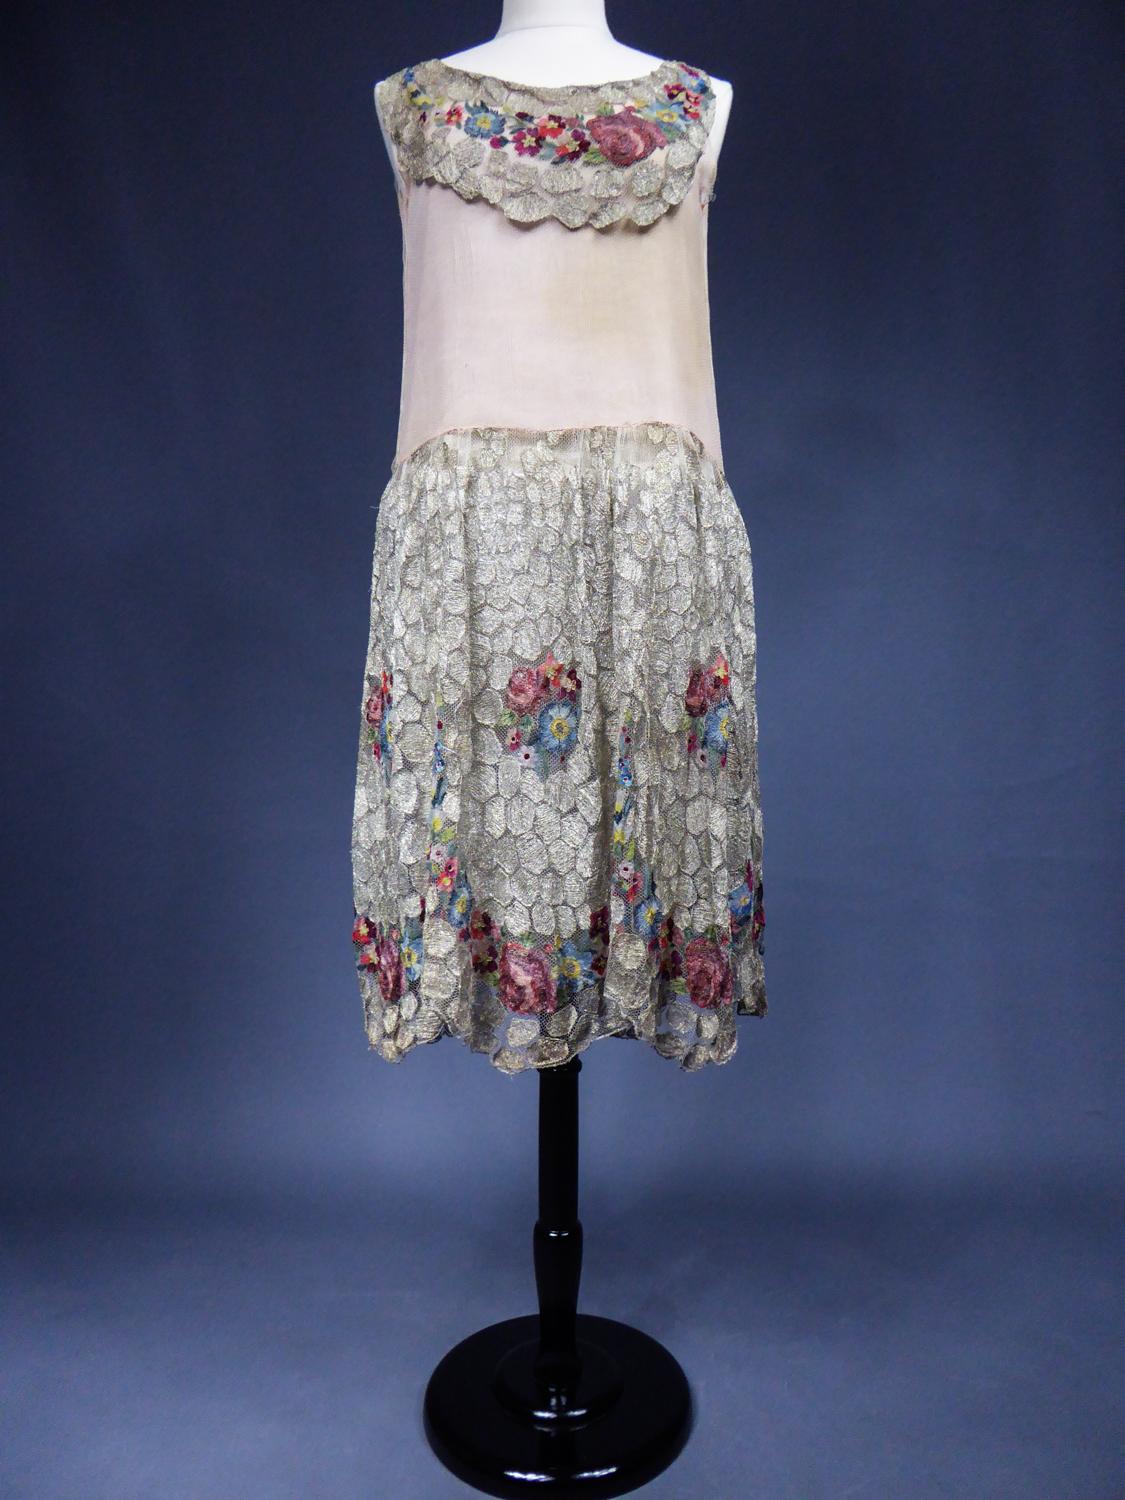 Circa 1920/1925
France

Evening dress in powder pink muslin and embroidered tulle from the Art Deco period around 1920/1925. Low-waisted straight dress and pleated skirt of coton tulle embroidered with roses and silver dots. Bustier in powder pink